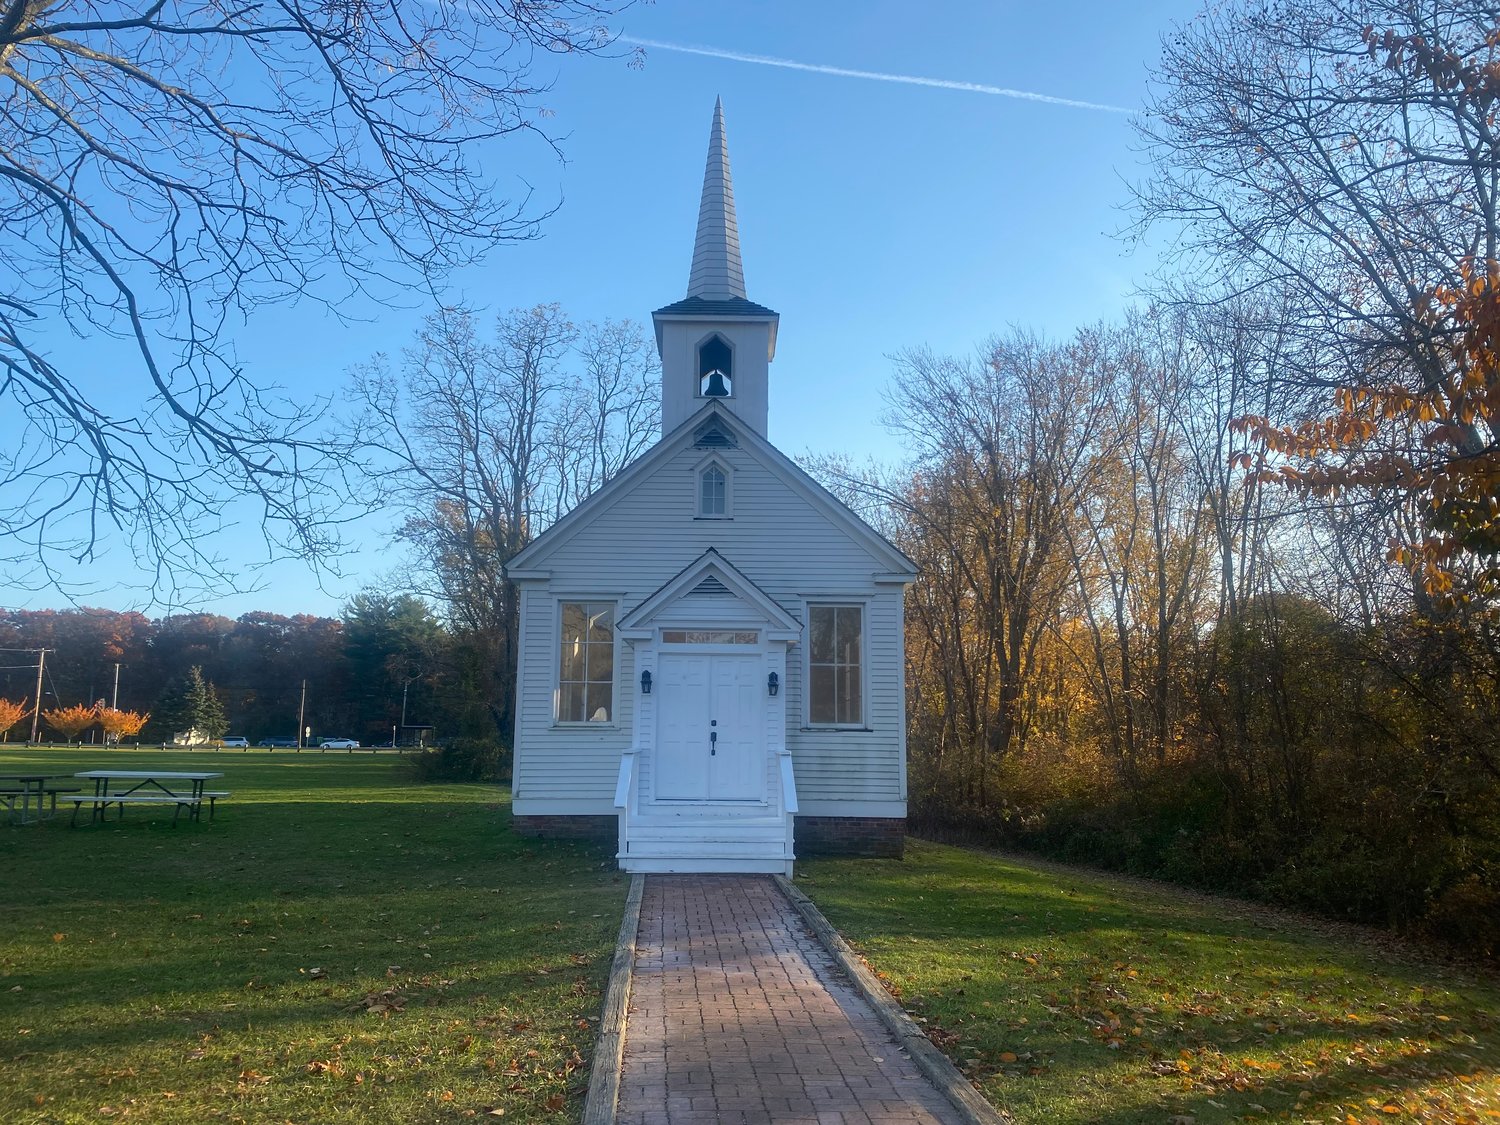 The scale-model of the Dutch Reformed Church in Sayville can be rented for weddings or photoshoots.